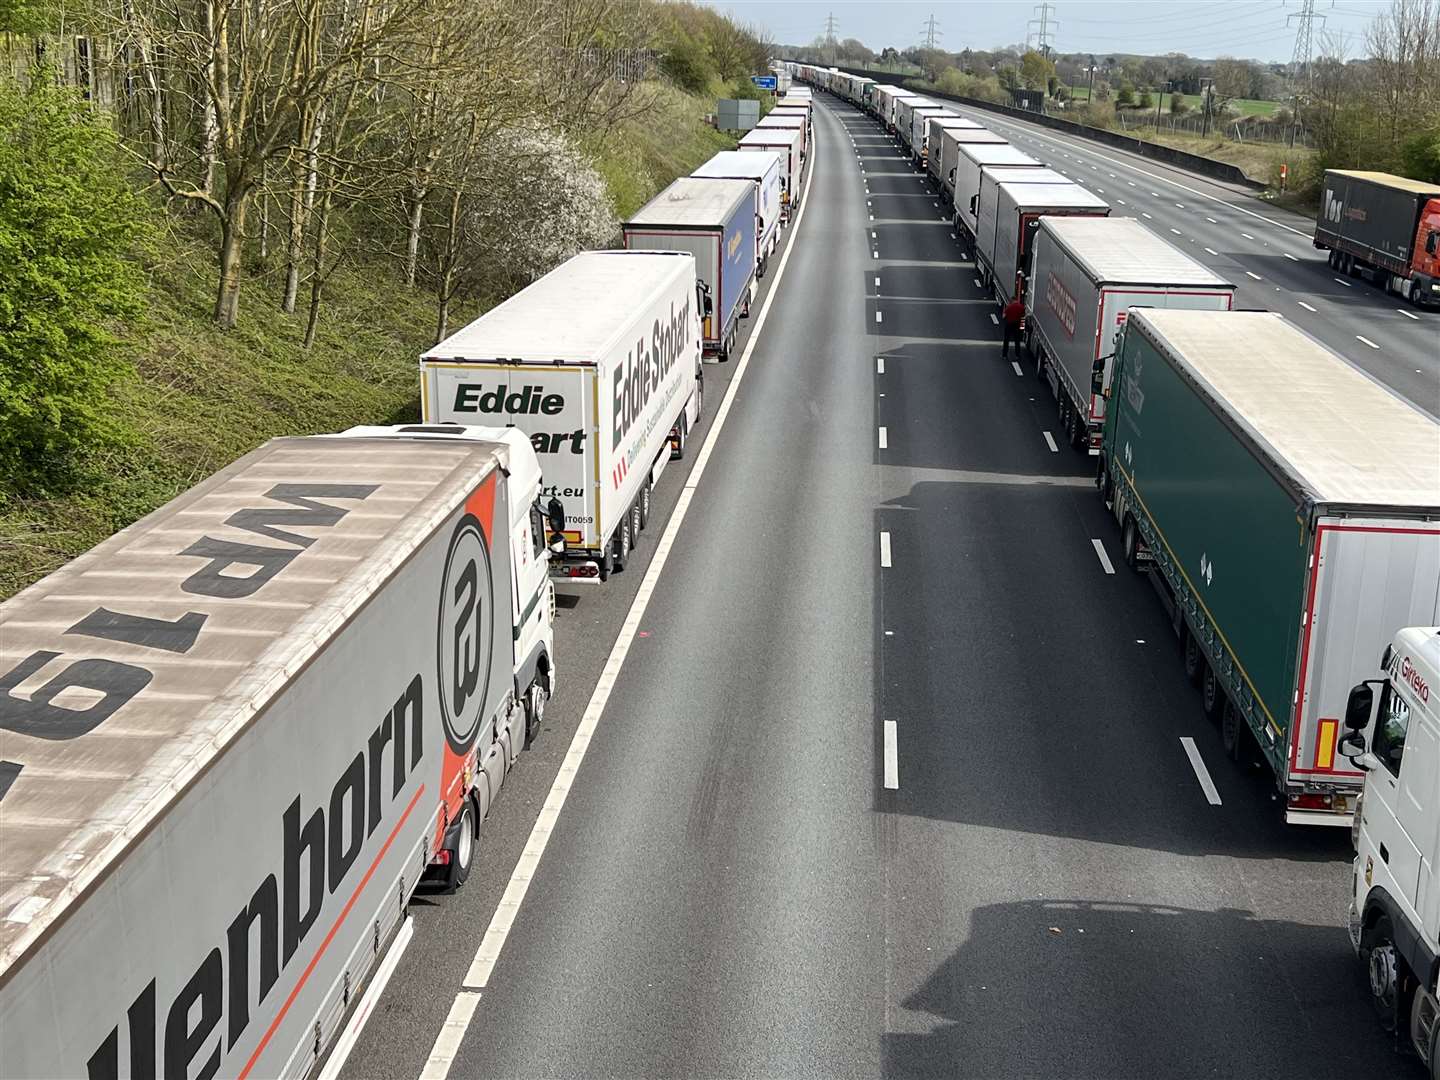 Some lorry drivers complained they did not receive food or water, nor were provided with toilets, when stuck in Operation Brock. Picture: Barry Goodwin